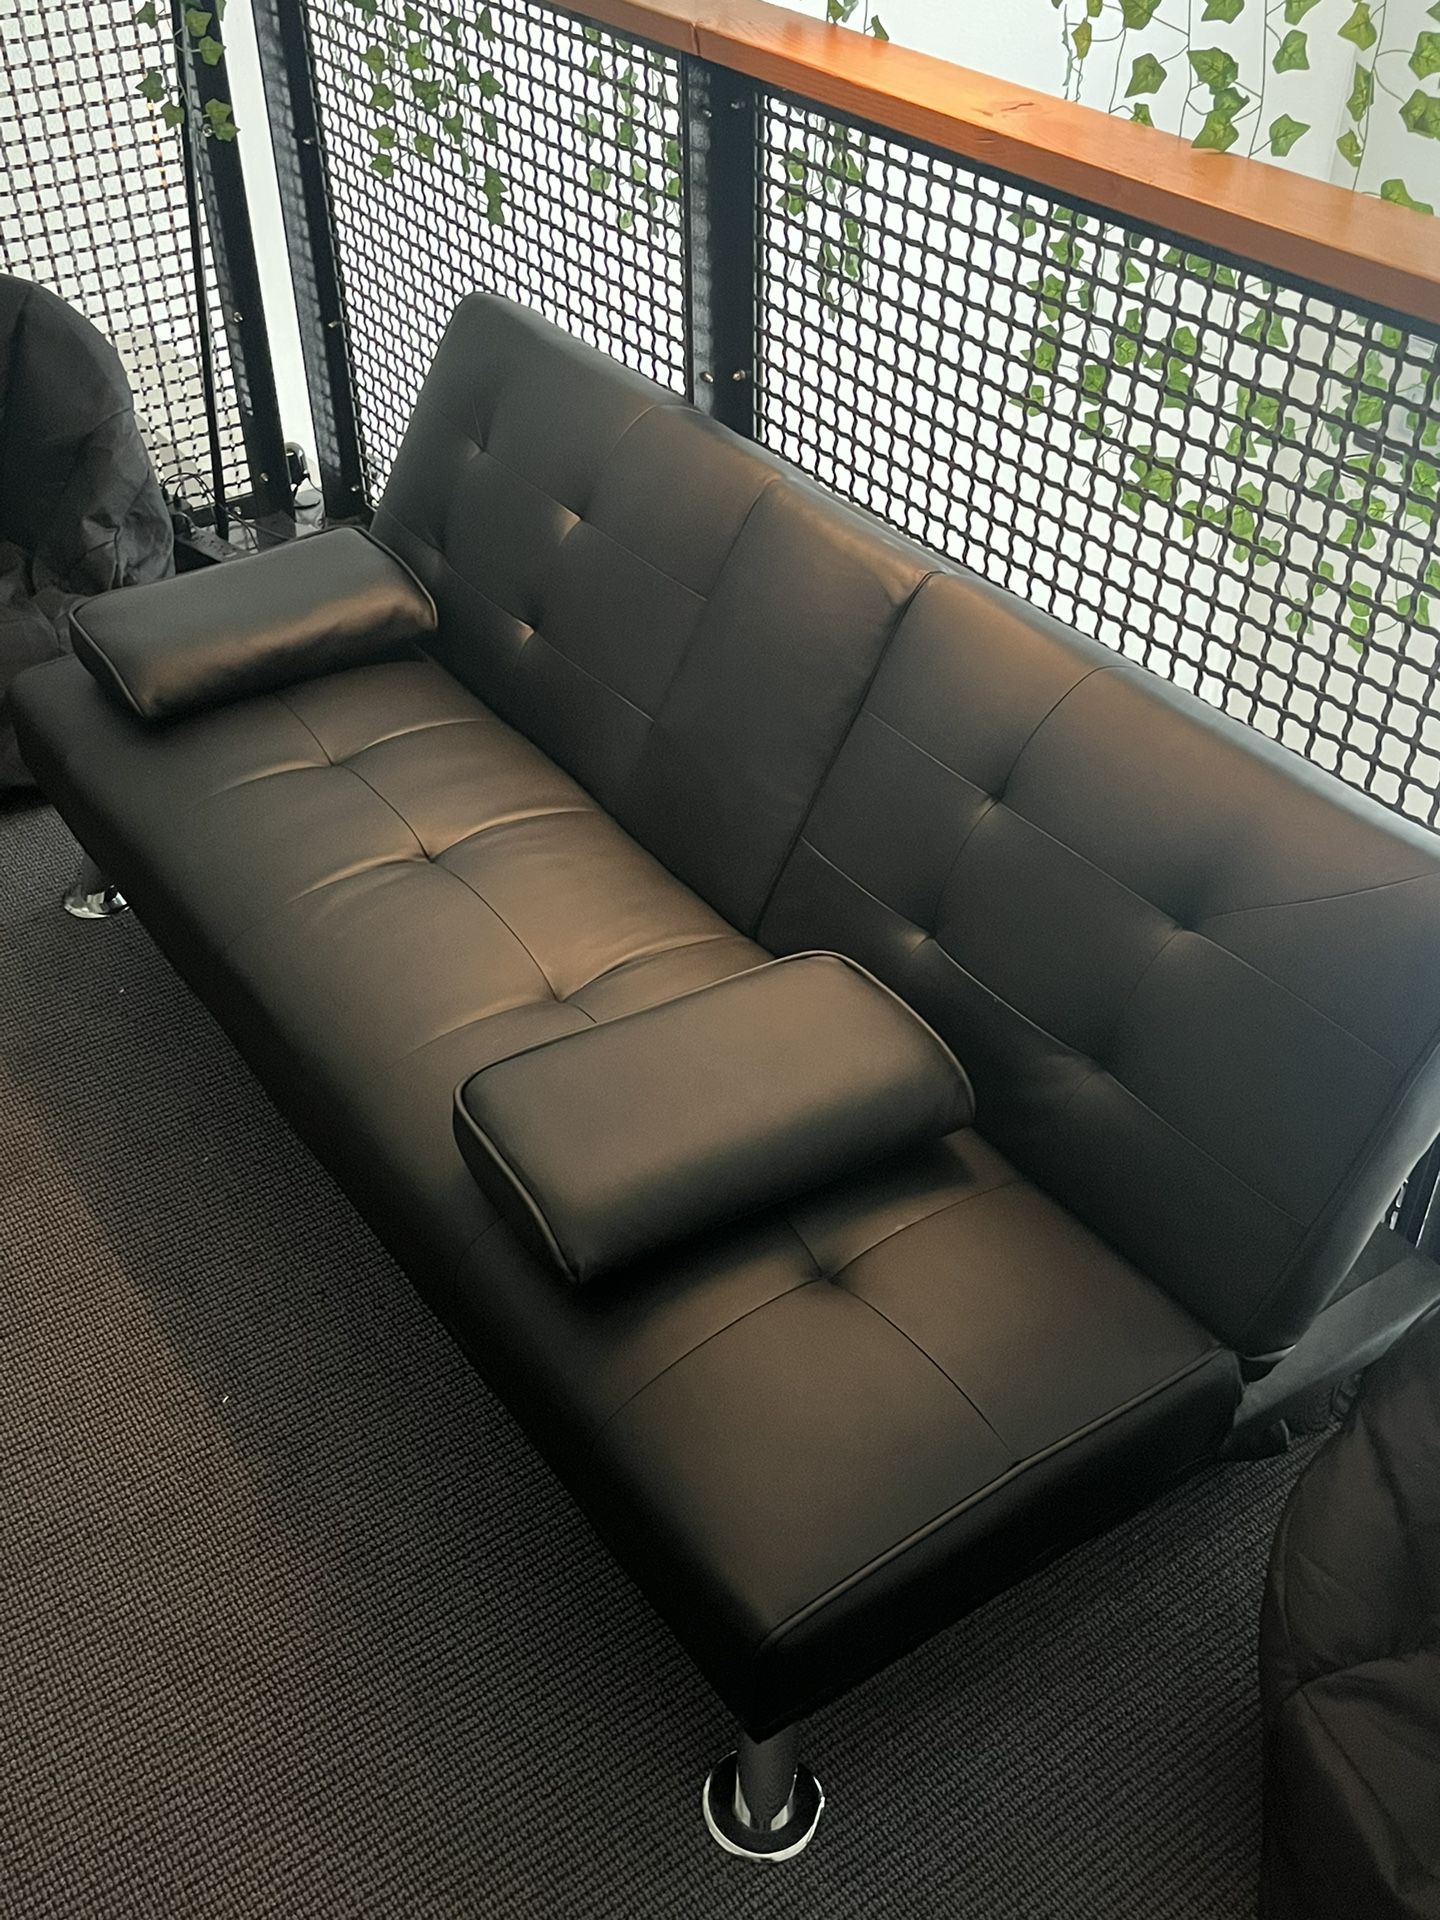 (2) Futon Couches (Converts to flat beds)